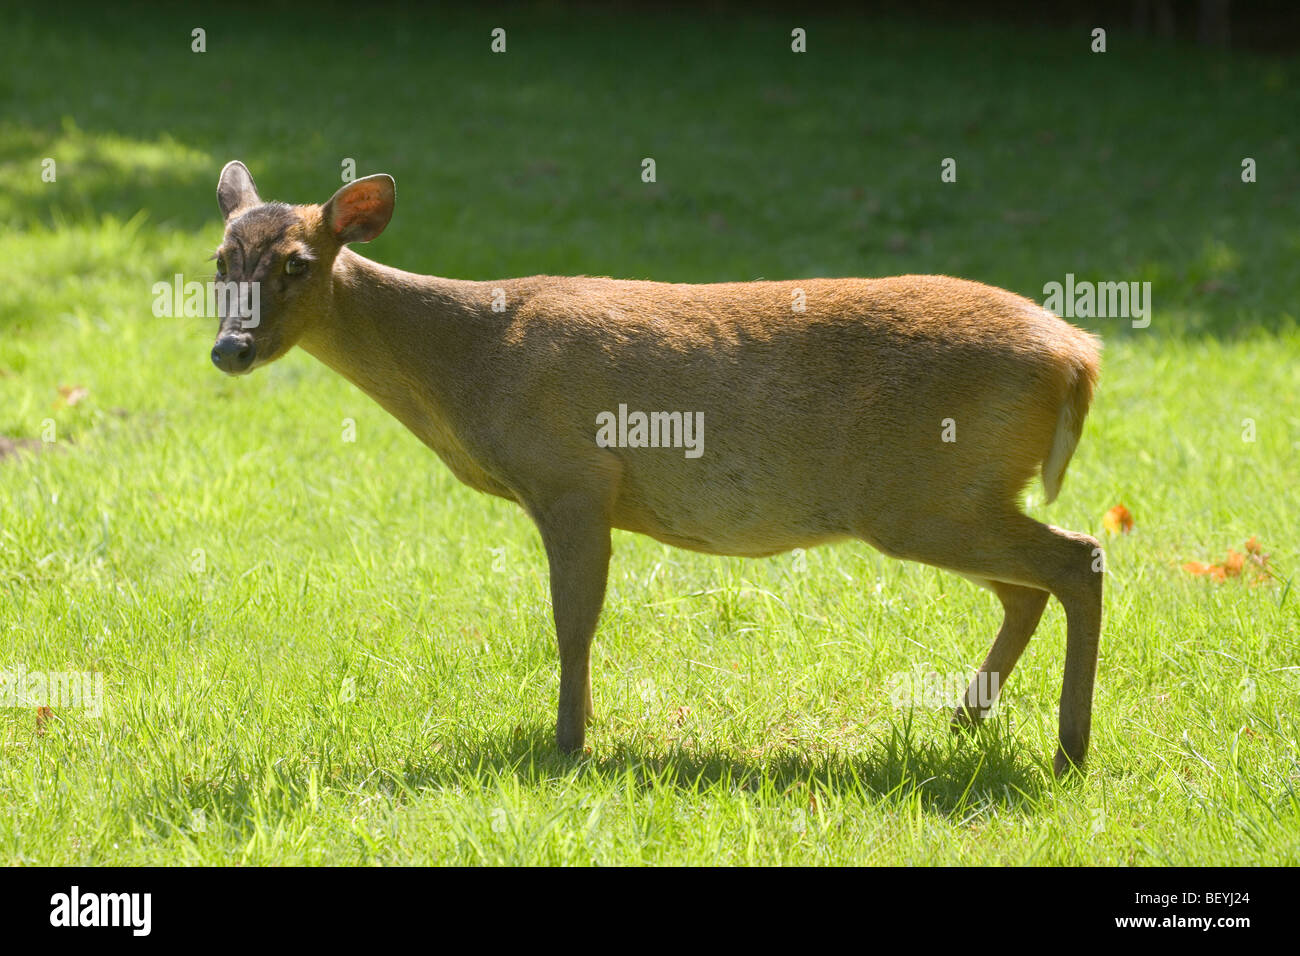 Muntjac Deer (Muntiacus reevesi). Female. Summer coat. August. Norfolk, England. Gravid or pregnant. Out in the open. Stock Photo